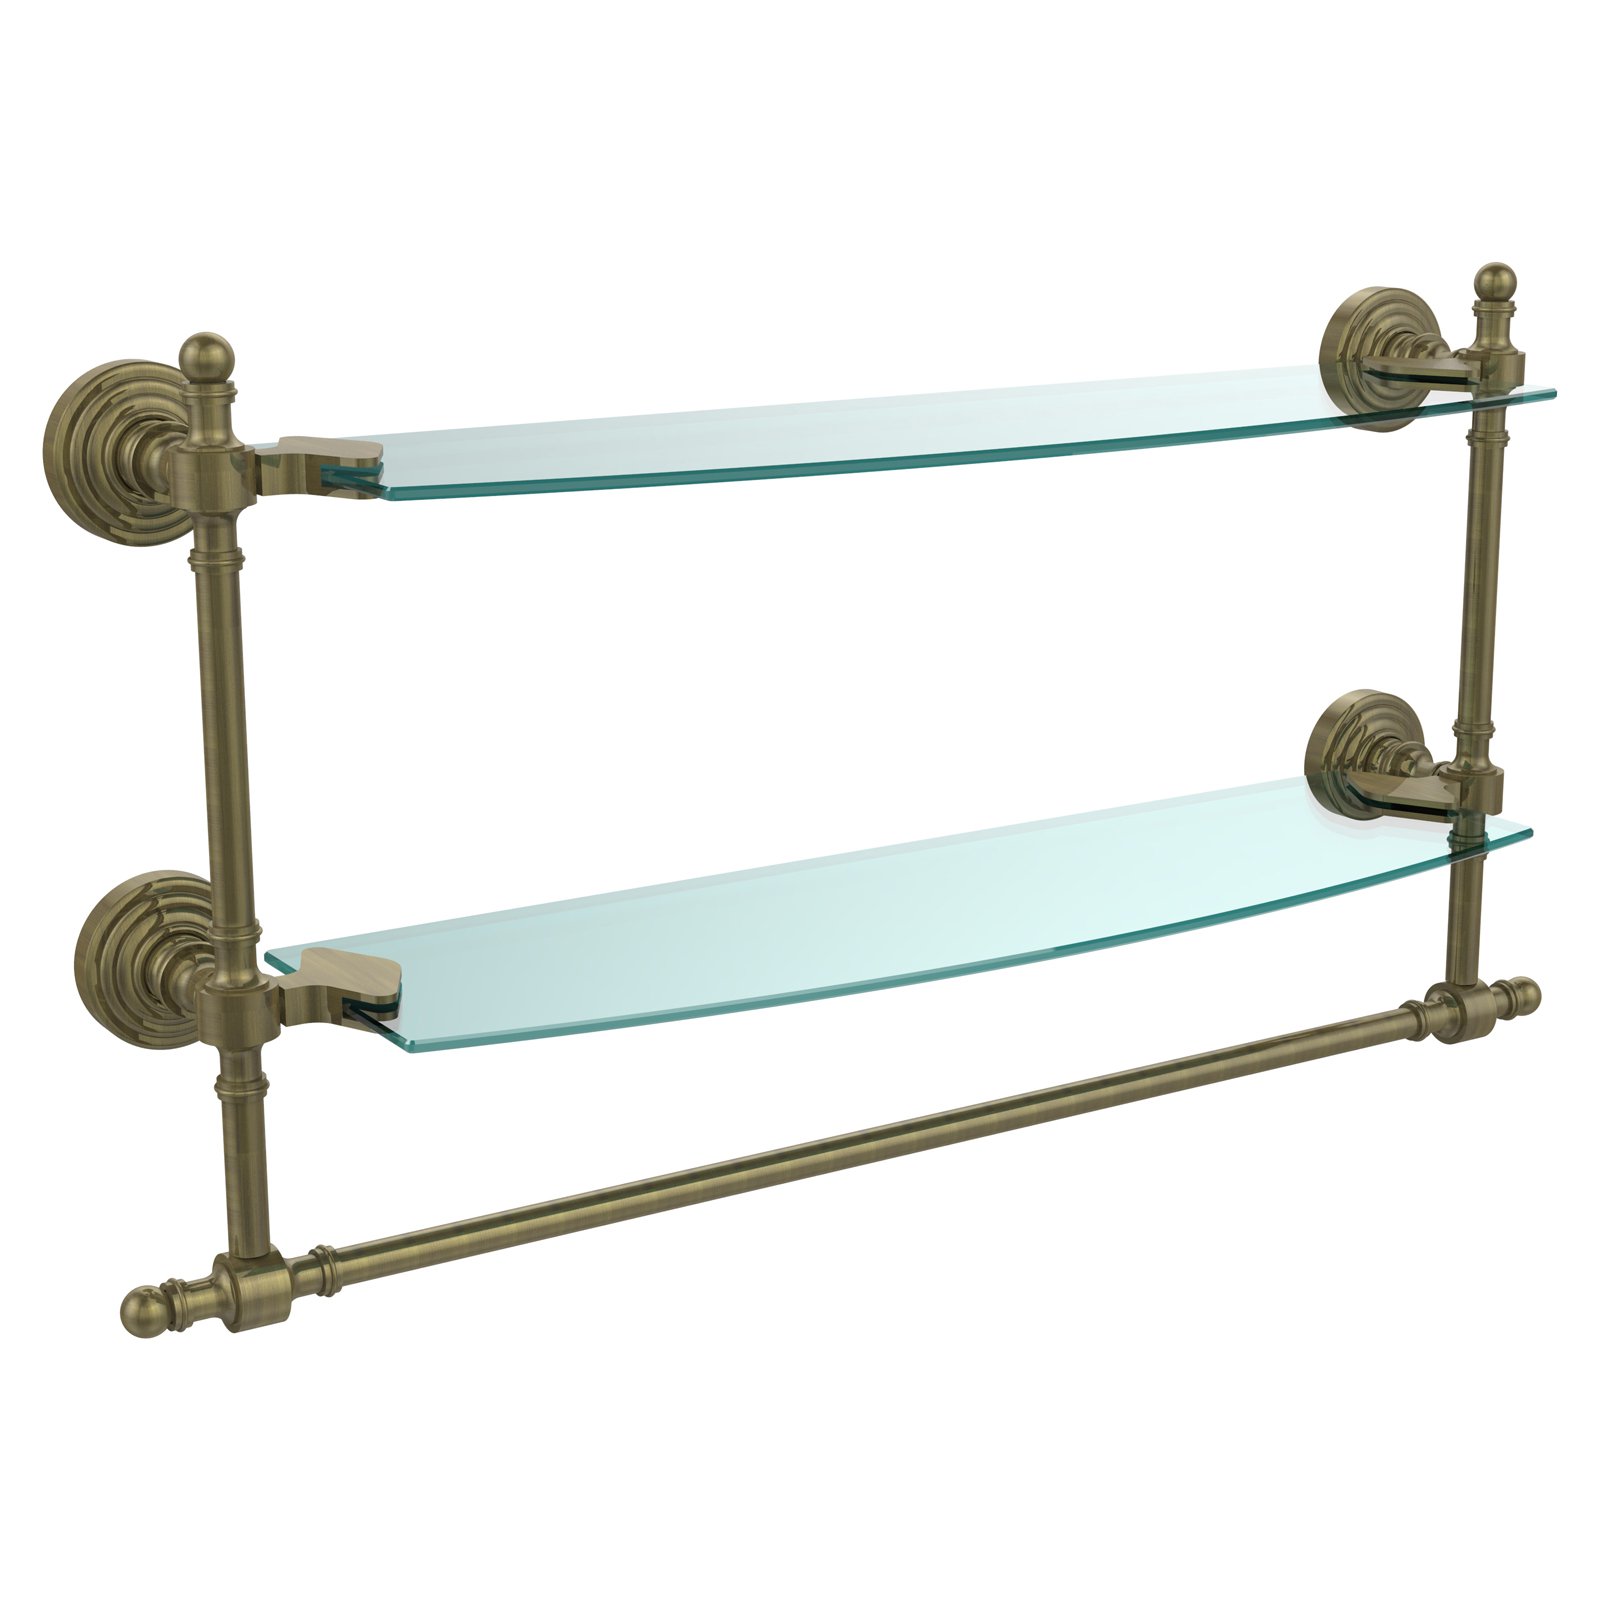 Retro Wave Collection Two Tiered Glass Shelf with Integrated Towel Bar - Antique Copper / 18 Inch - image 2 of 2